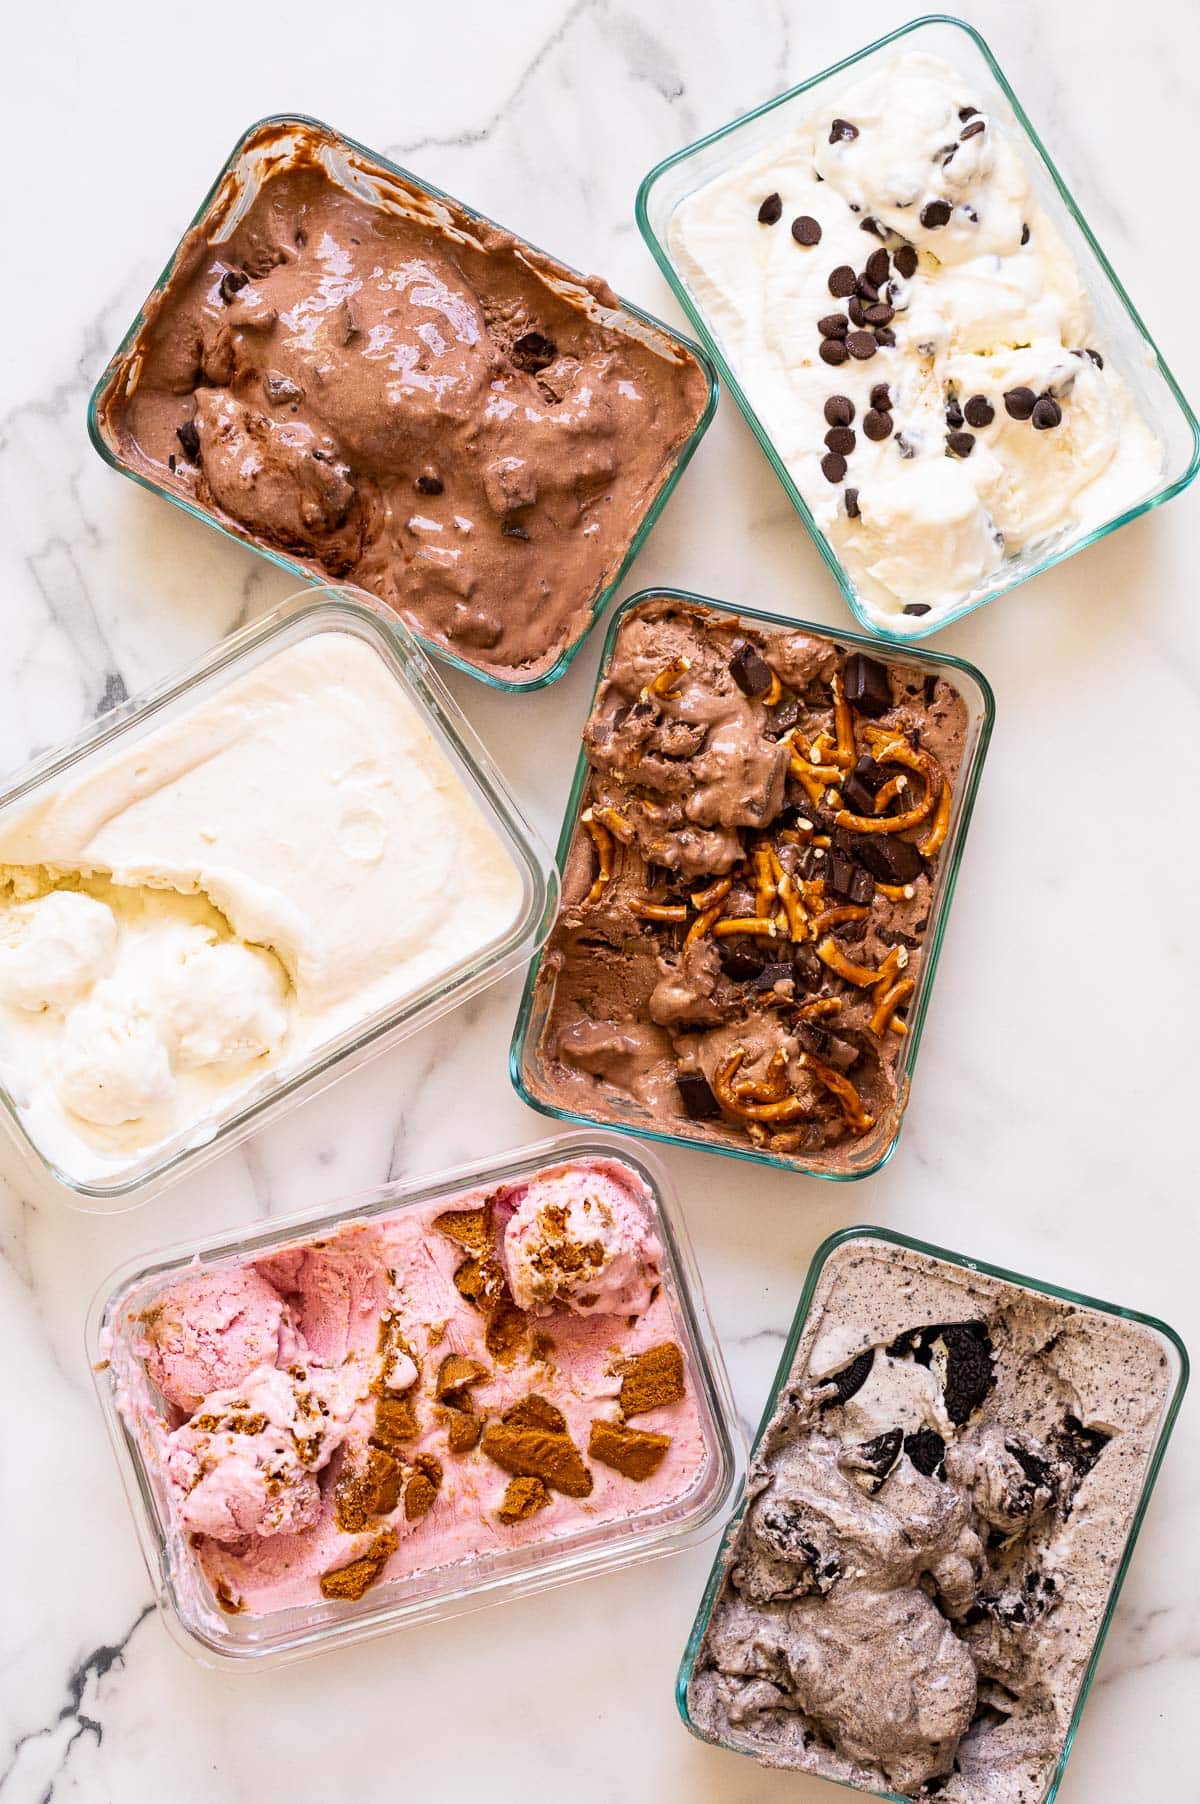 Cottage cheese ice cream of six flavors in glass containers on a countertop.